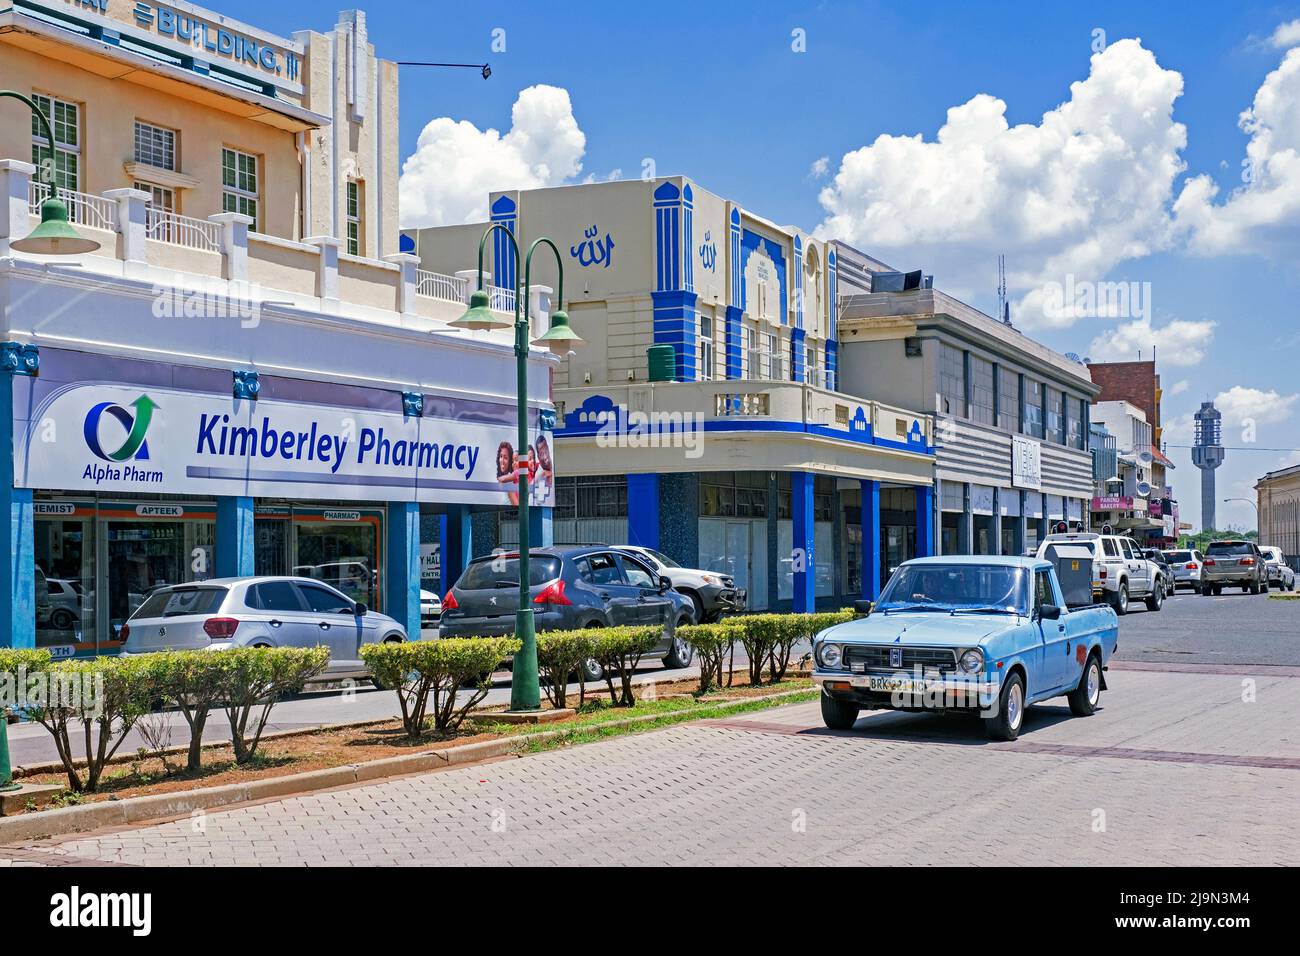 Shops in main street of the capital city Kimberley, Frances Baard, Northern Cape province, South Africa Stock Photo